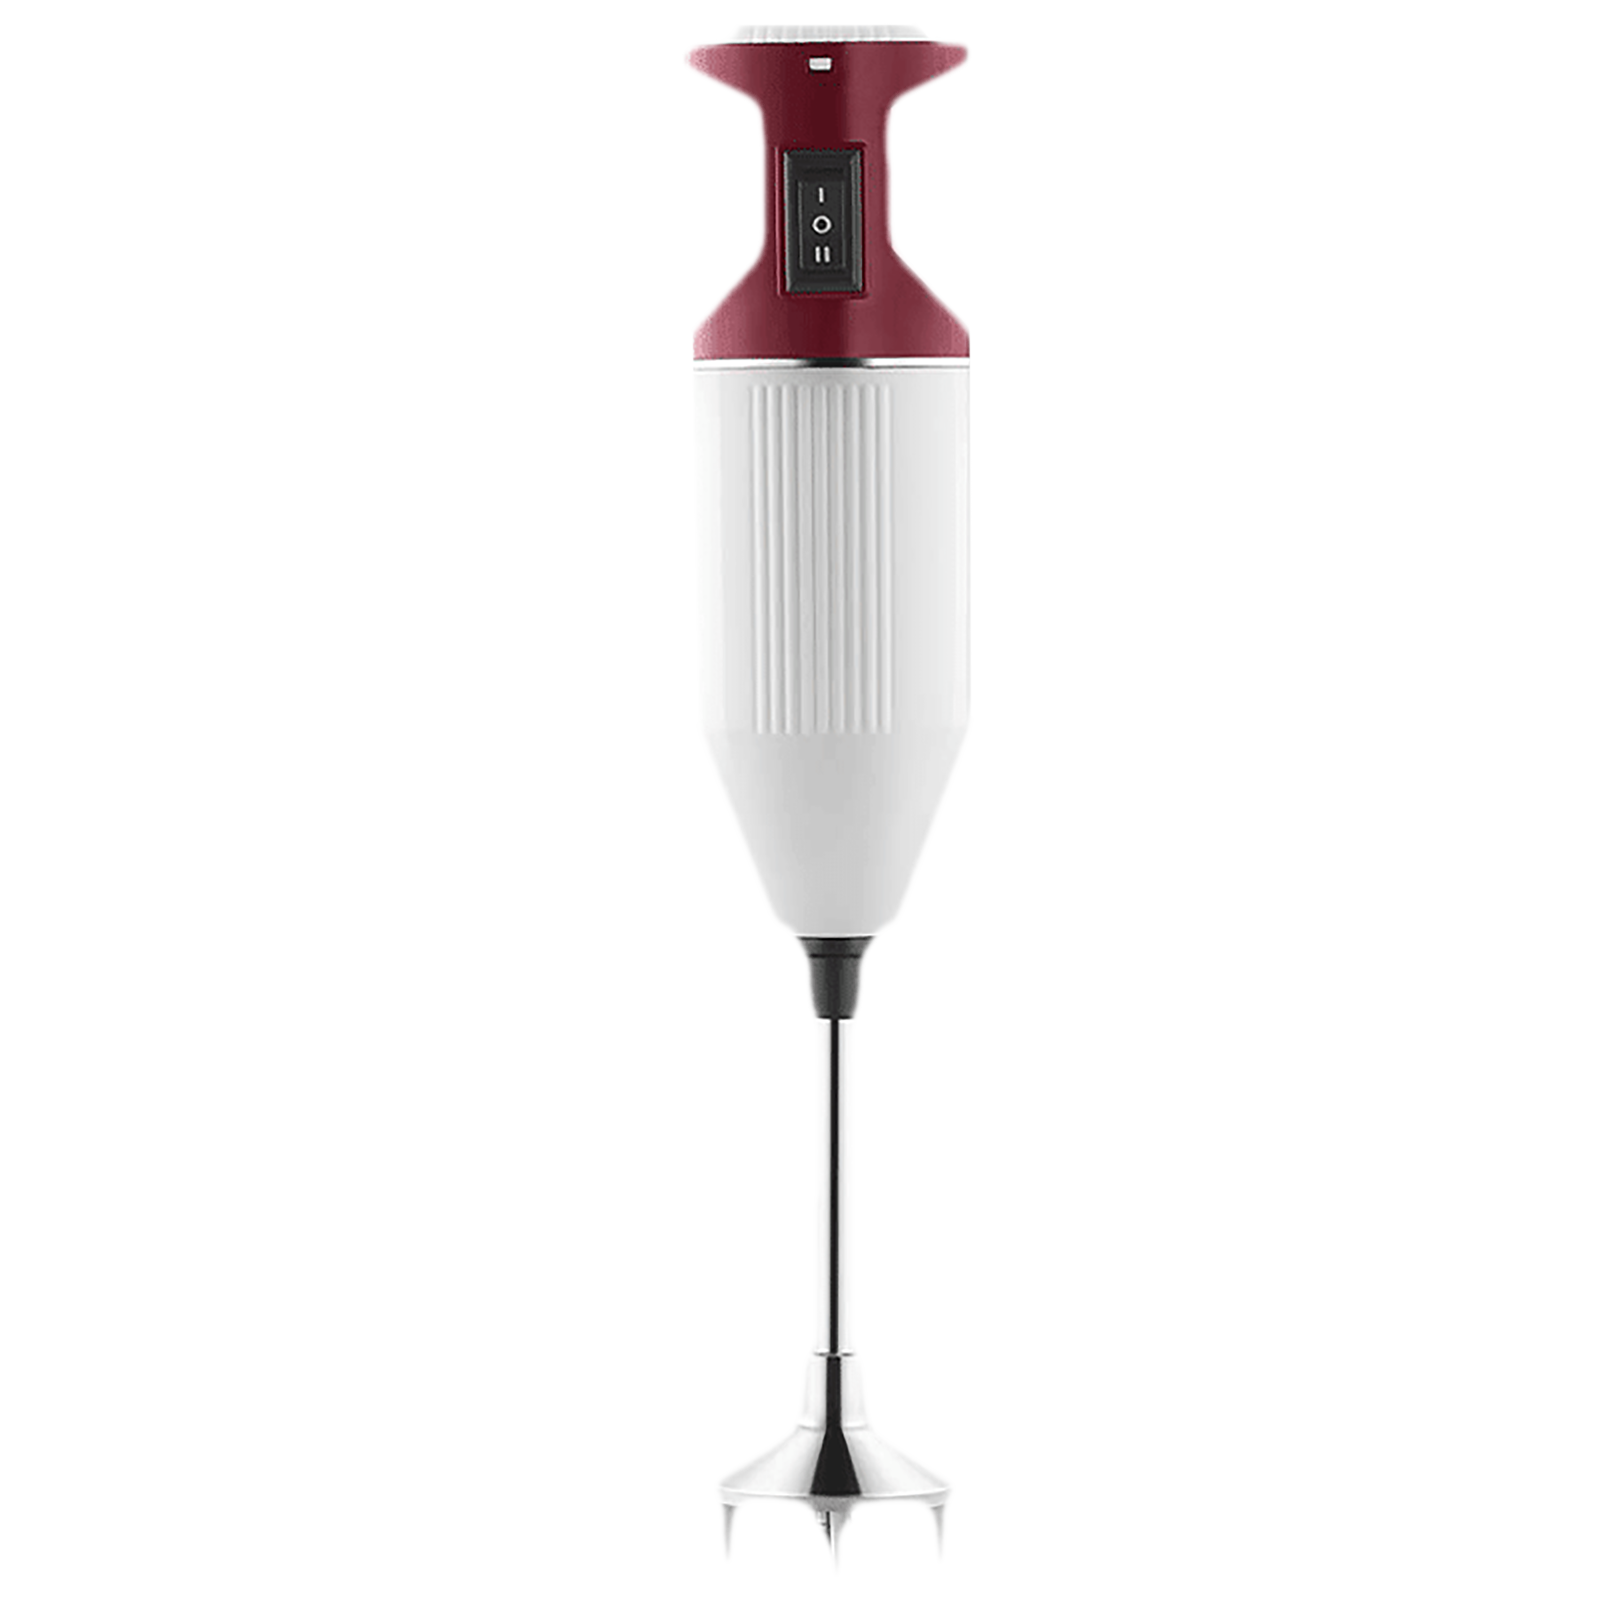 USHA Sure Blend 125 Watt 2 Speed Hand Blender with 3 Attachments (Shock Proof, Red/White)